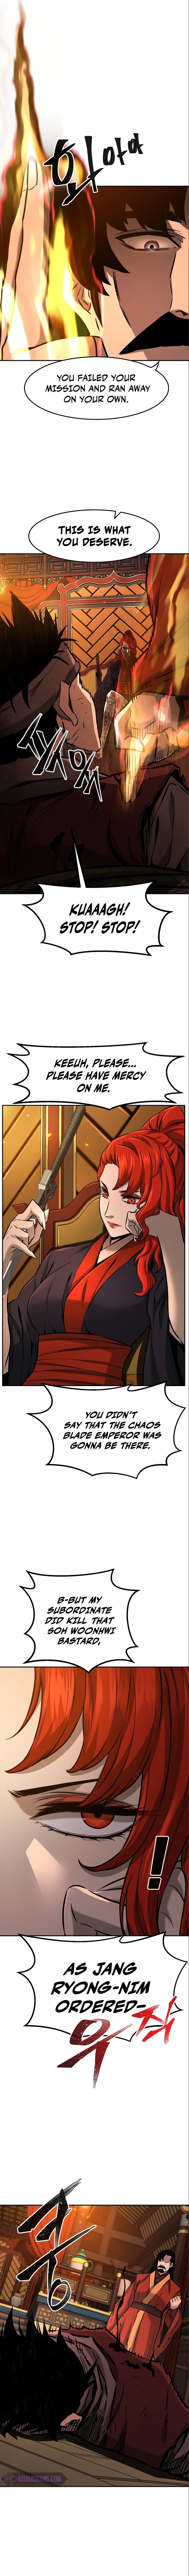 Absolute Sword Sense Chapter 54 Page 7